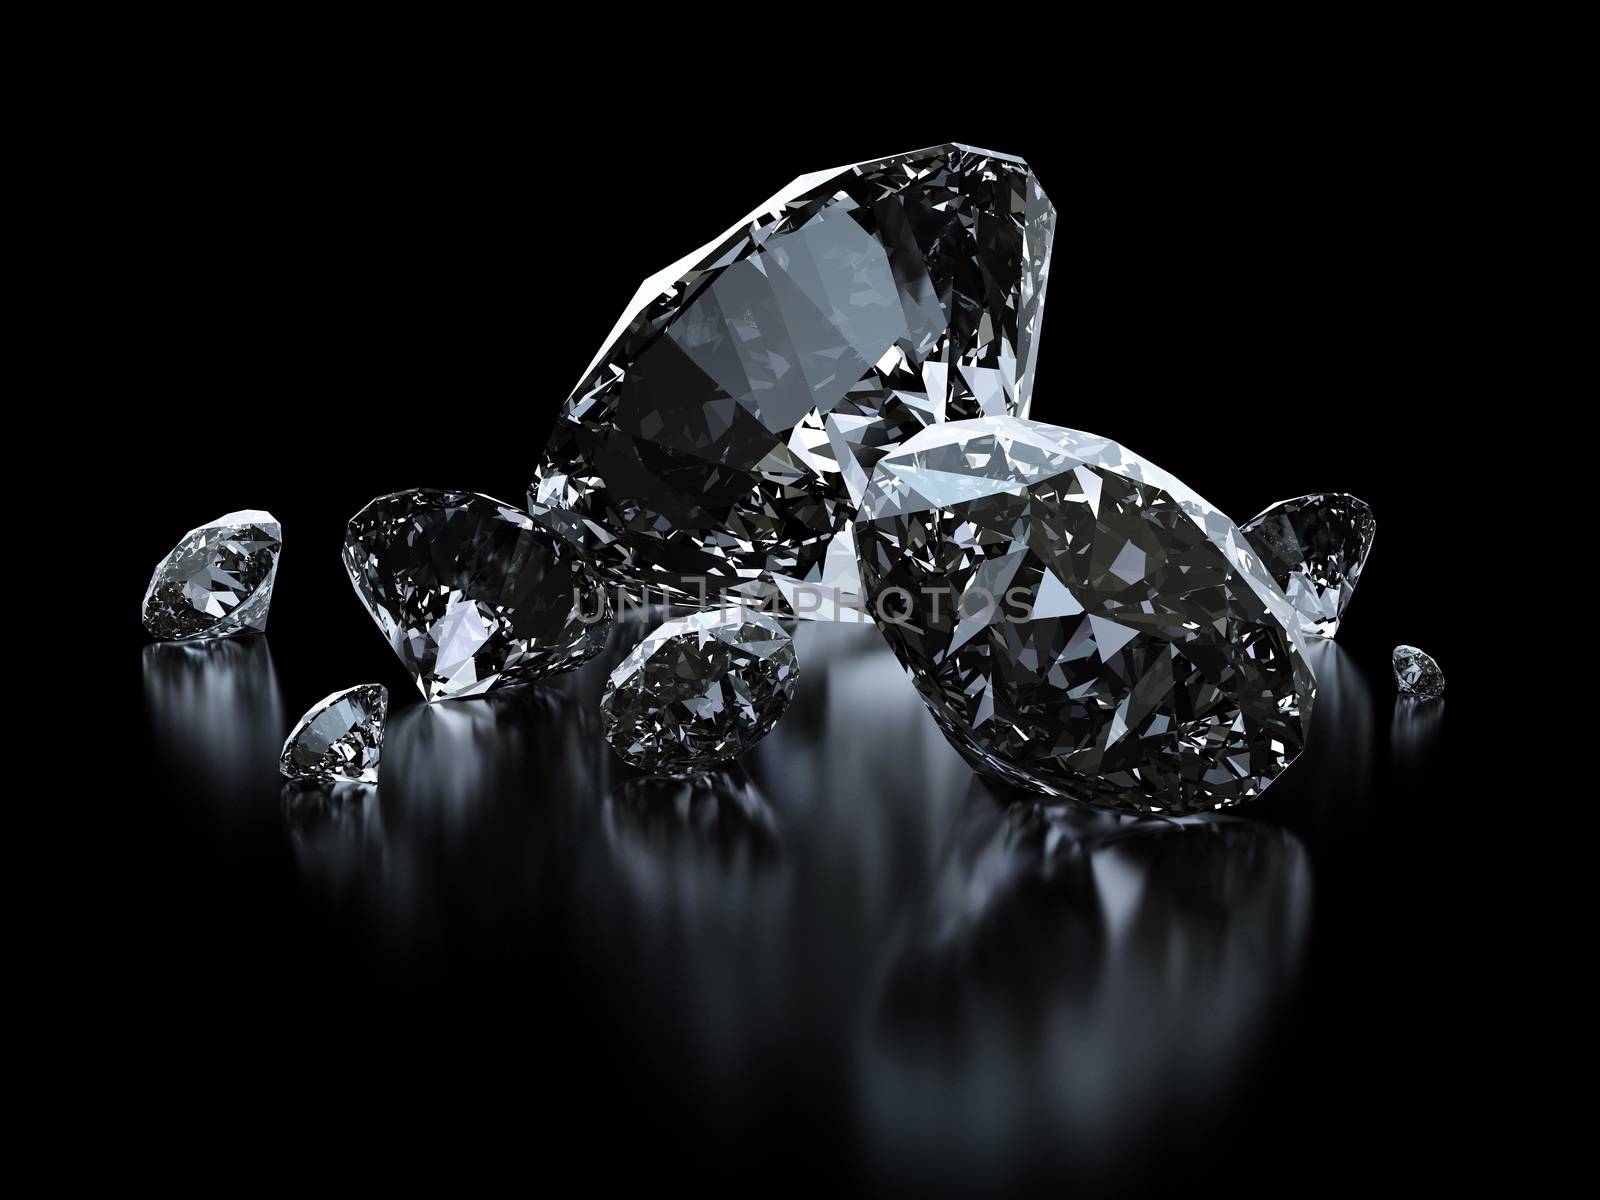 Luxury diamonds on black backgrounds - clipping path included by 123dartist